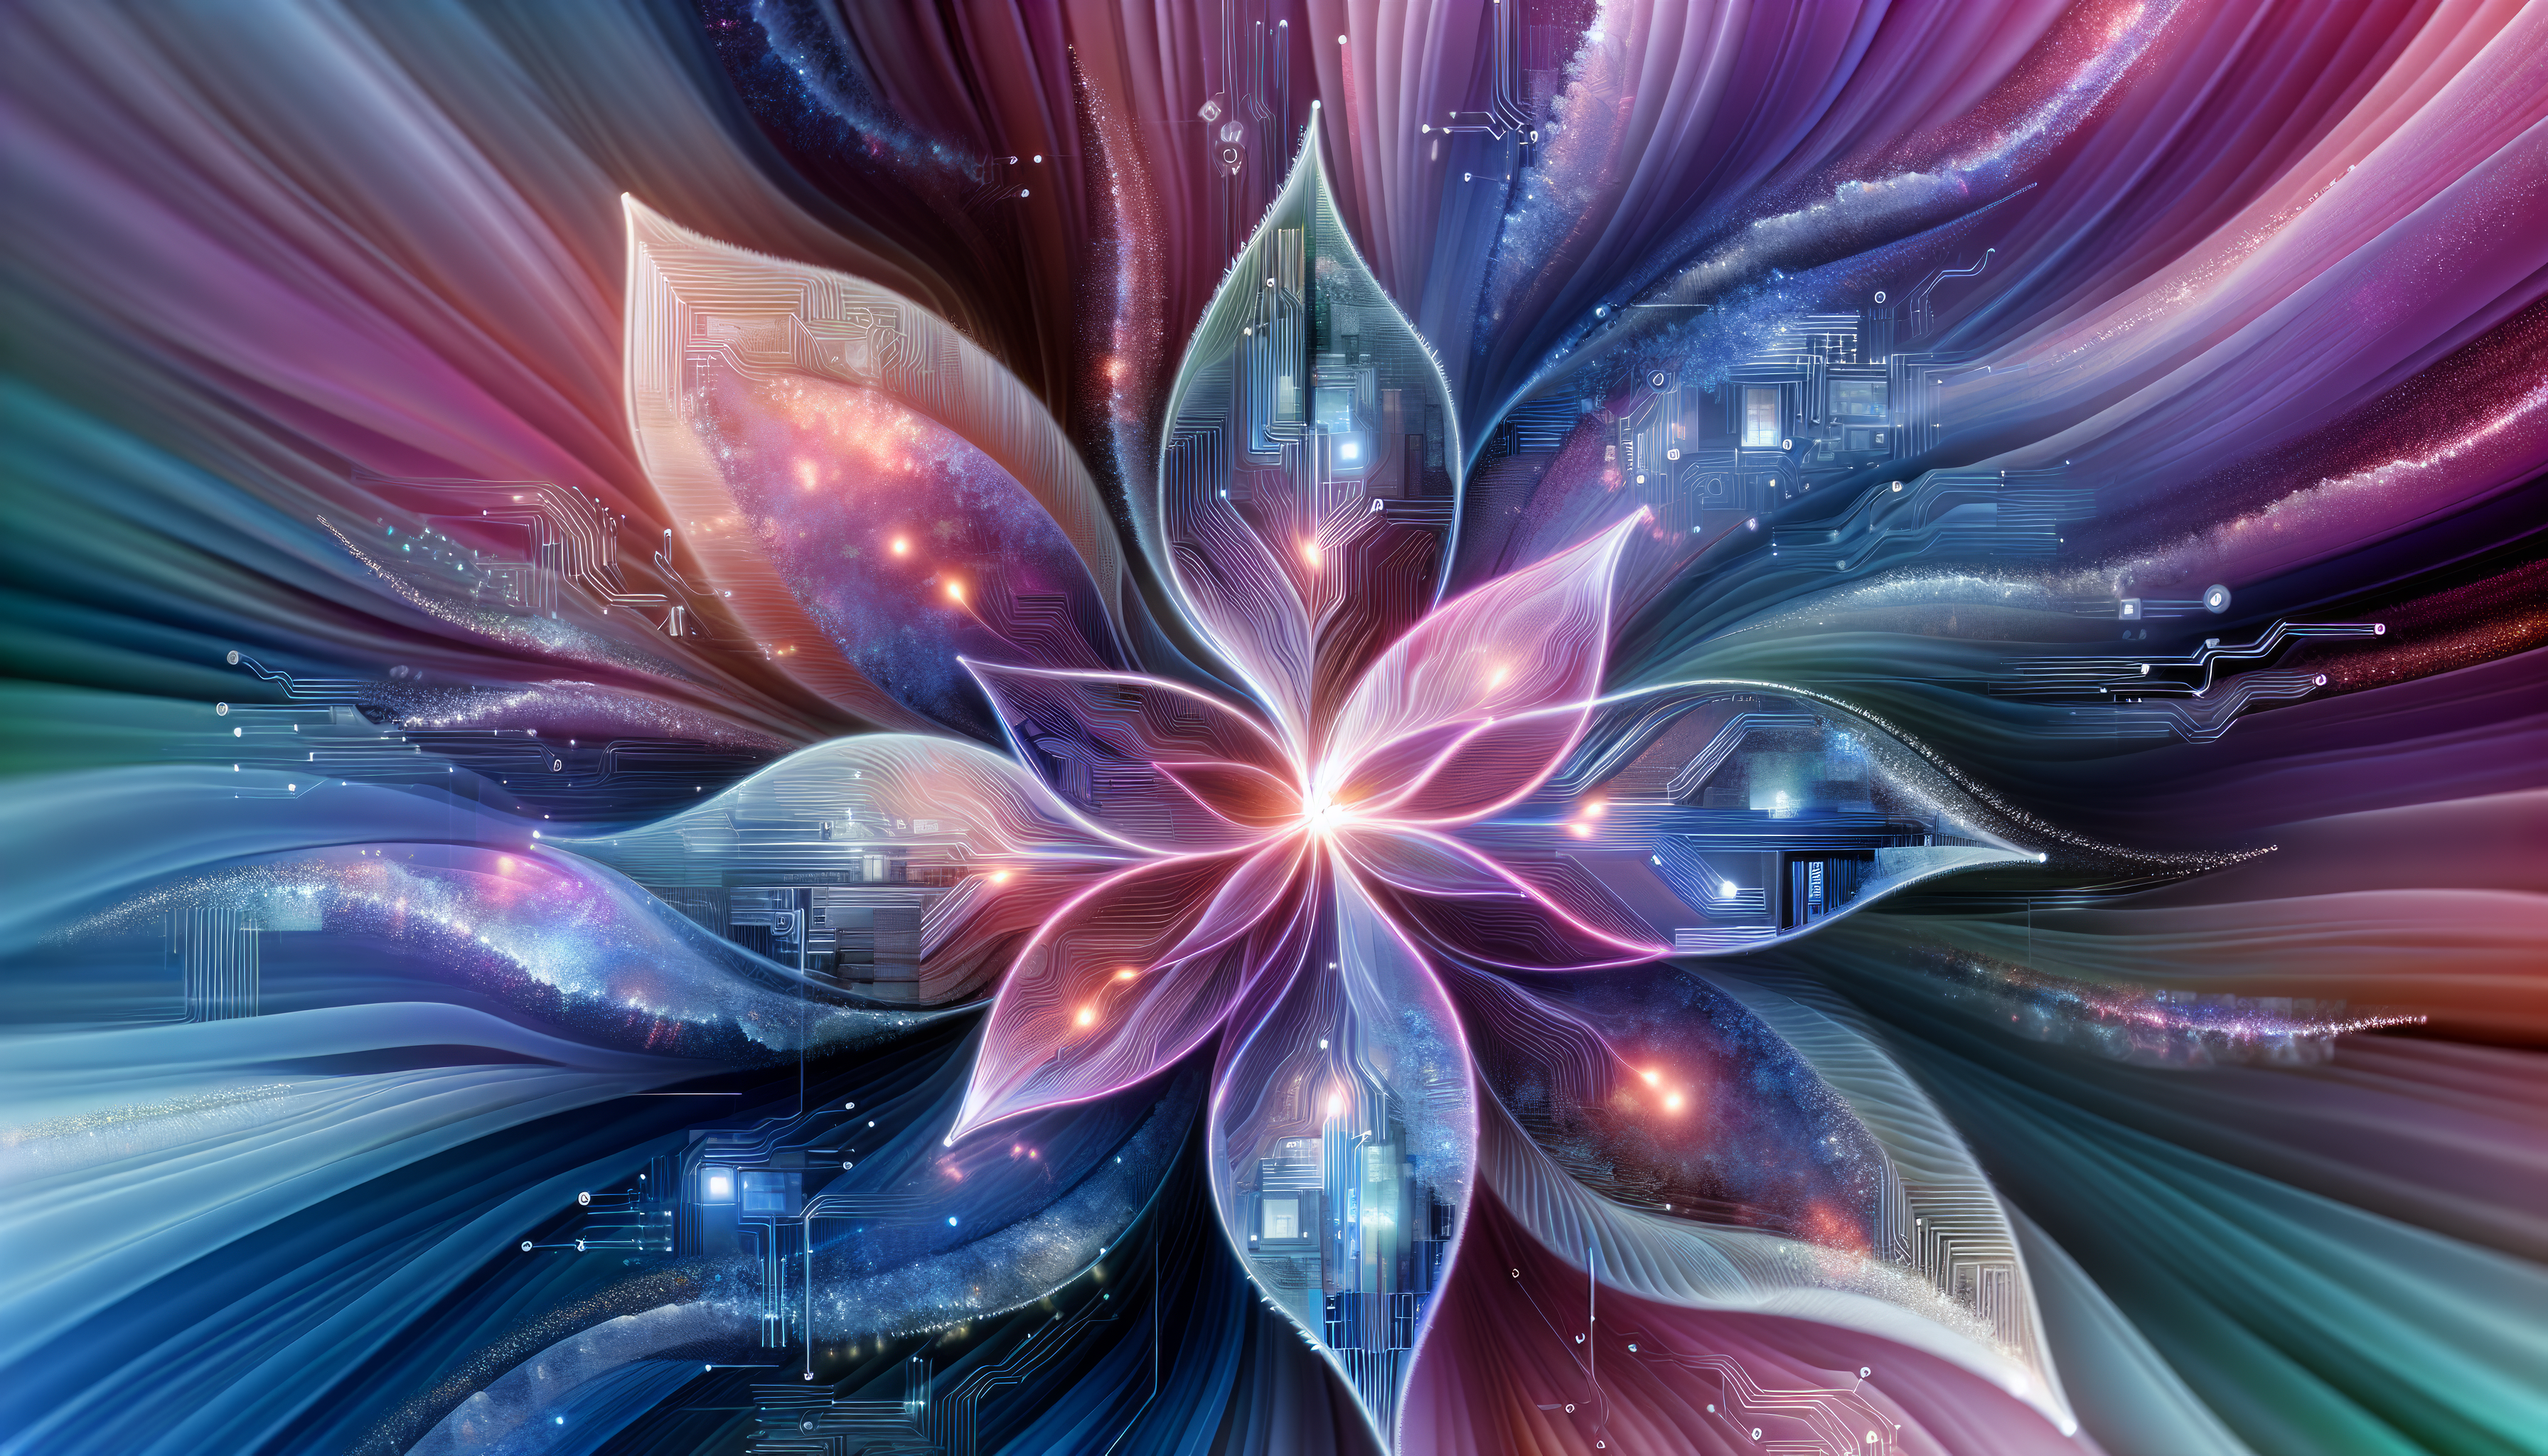 HD desktop wallpaper featuring an abstract flower with vibrant petals in a mesmerizing cosmic design, perfect for a background.